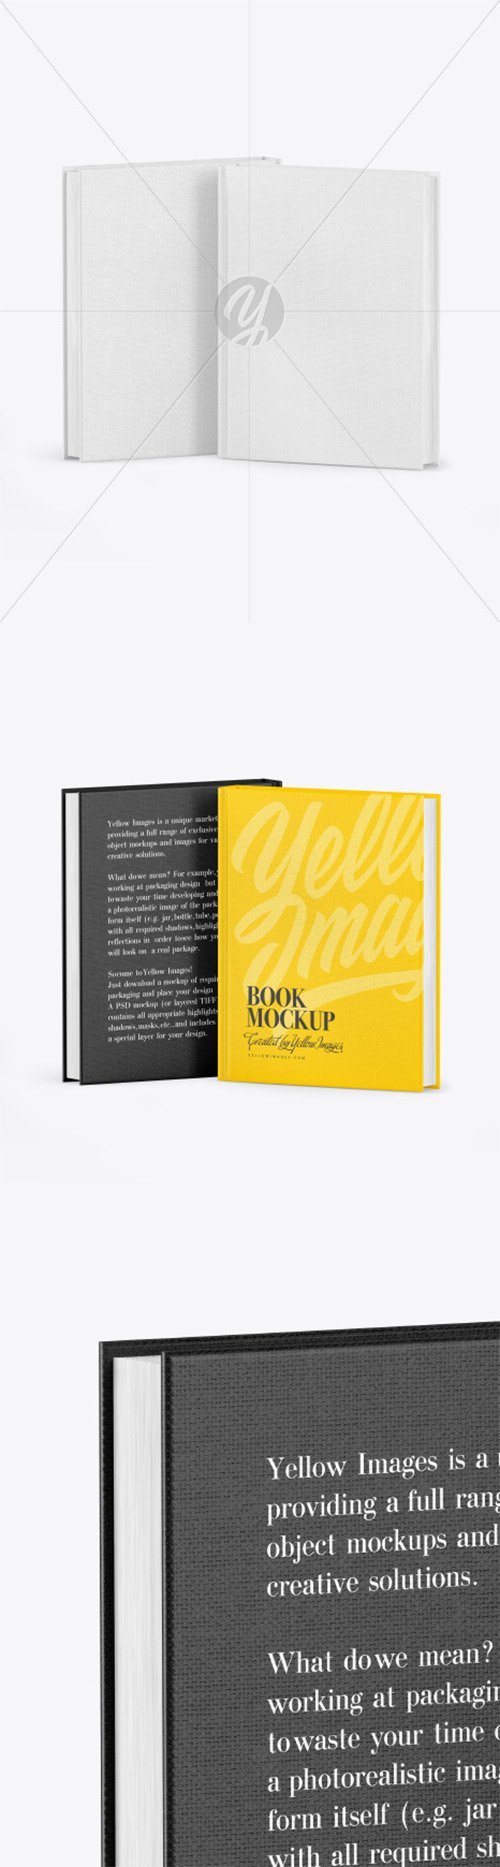 Two Hardcover Books w/ Fabric Covers Mockup 80361 TIF